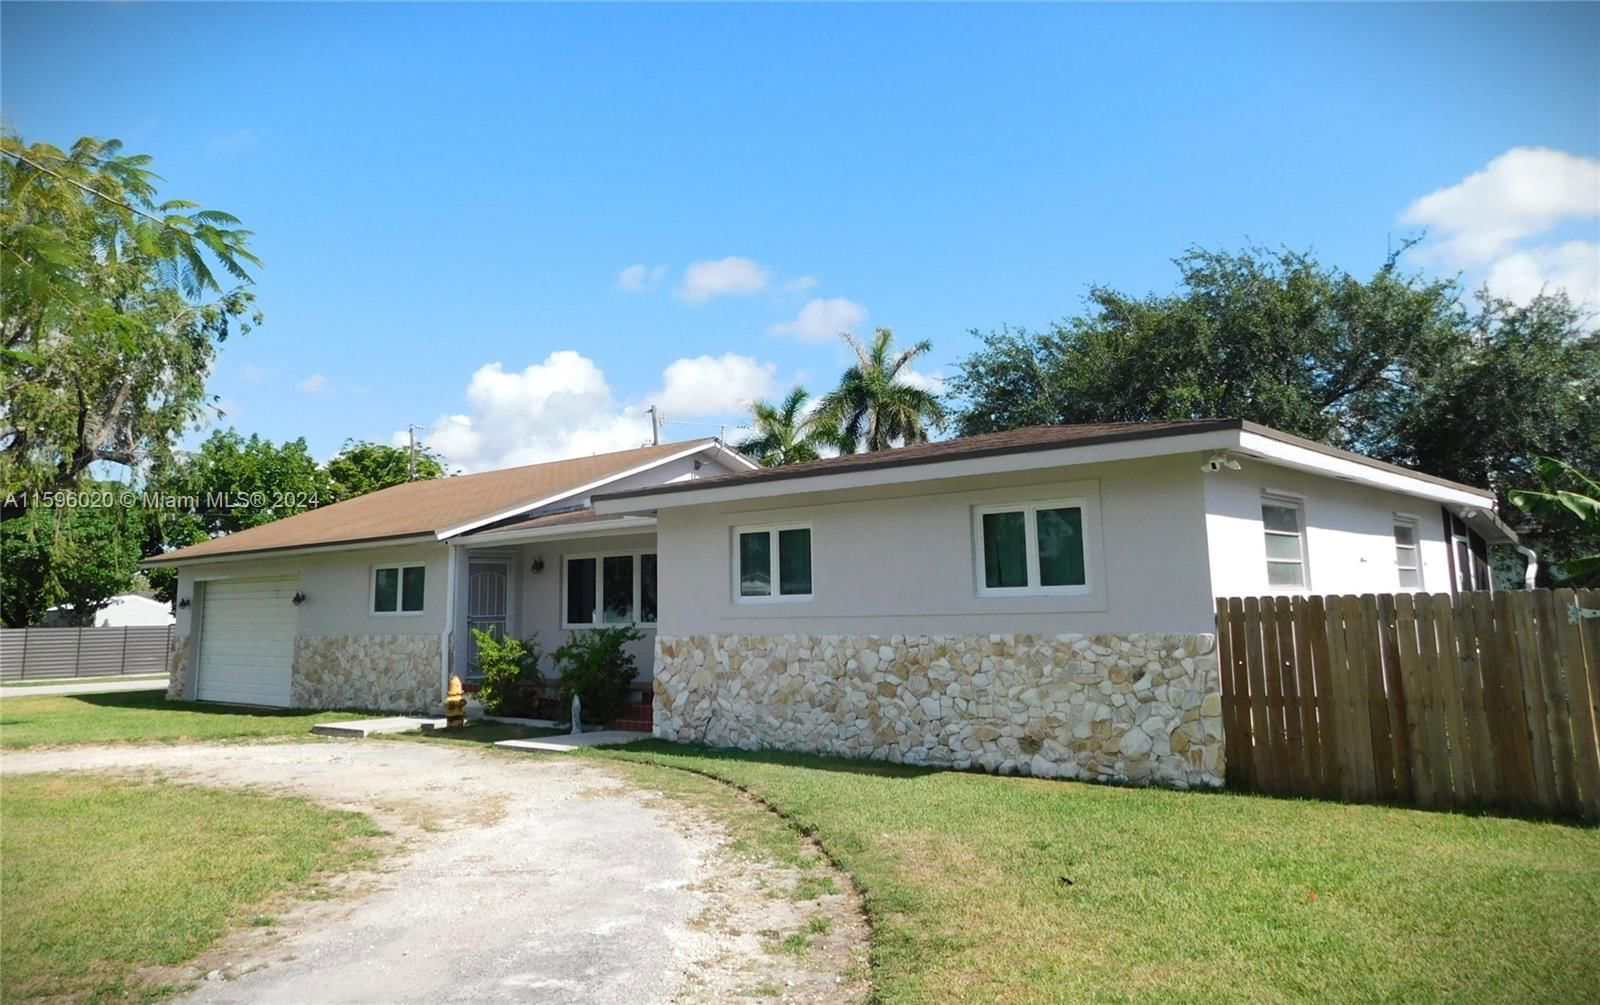 Real estate property located at 10795 34th St, Miami-Dade County, metes and bounds, Miami, FL